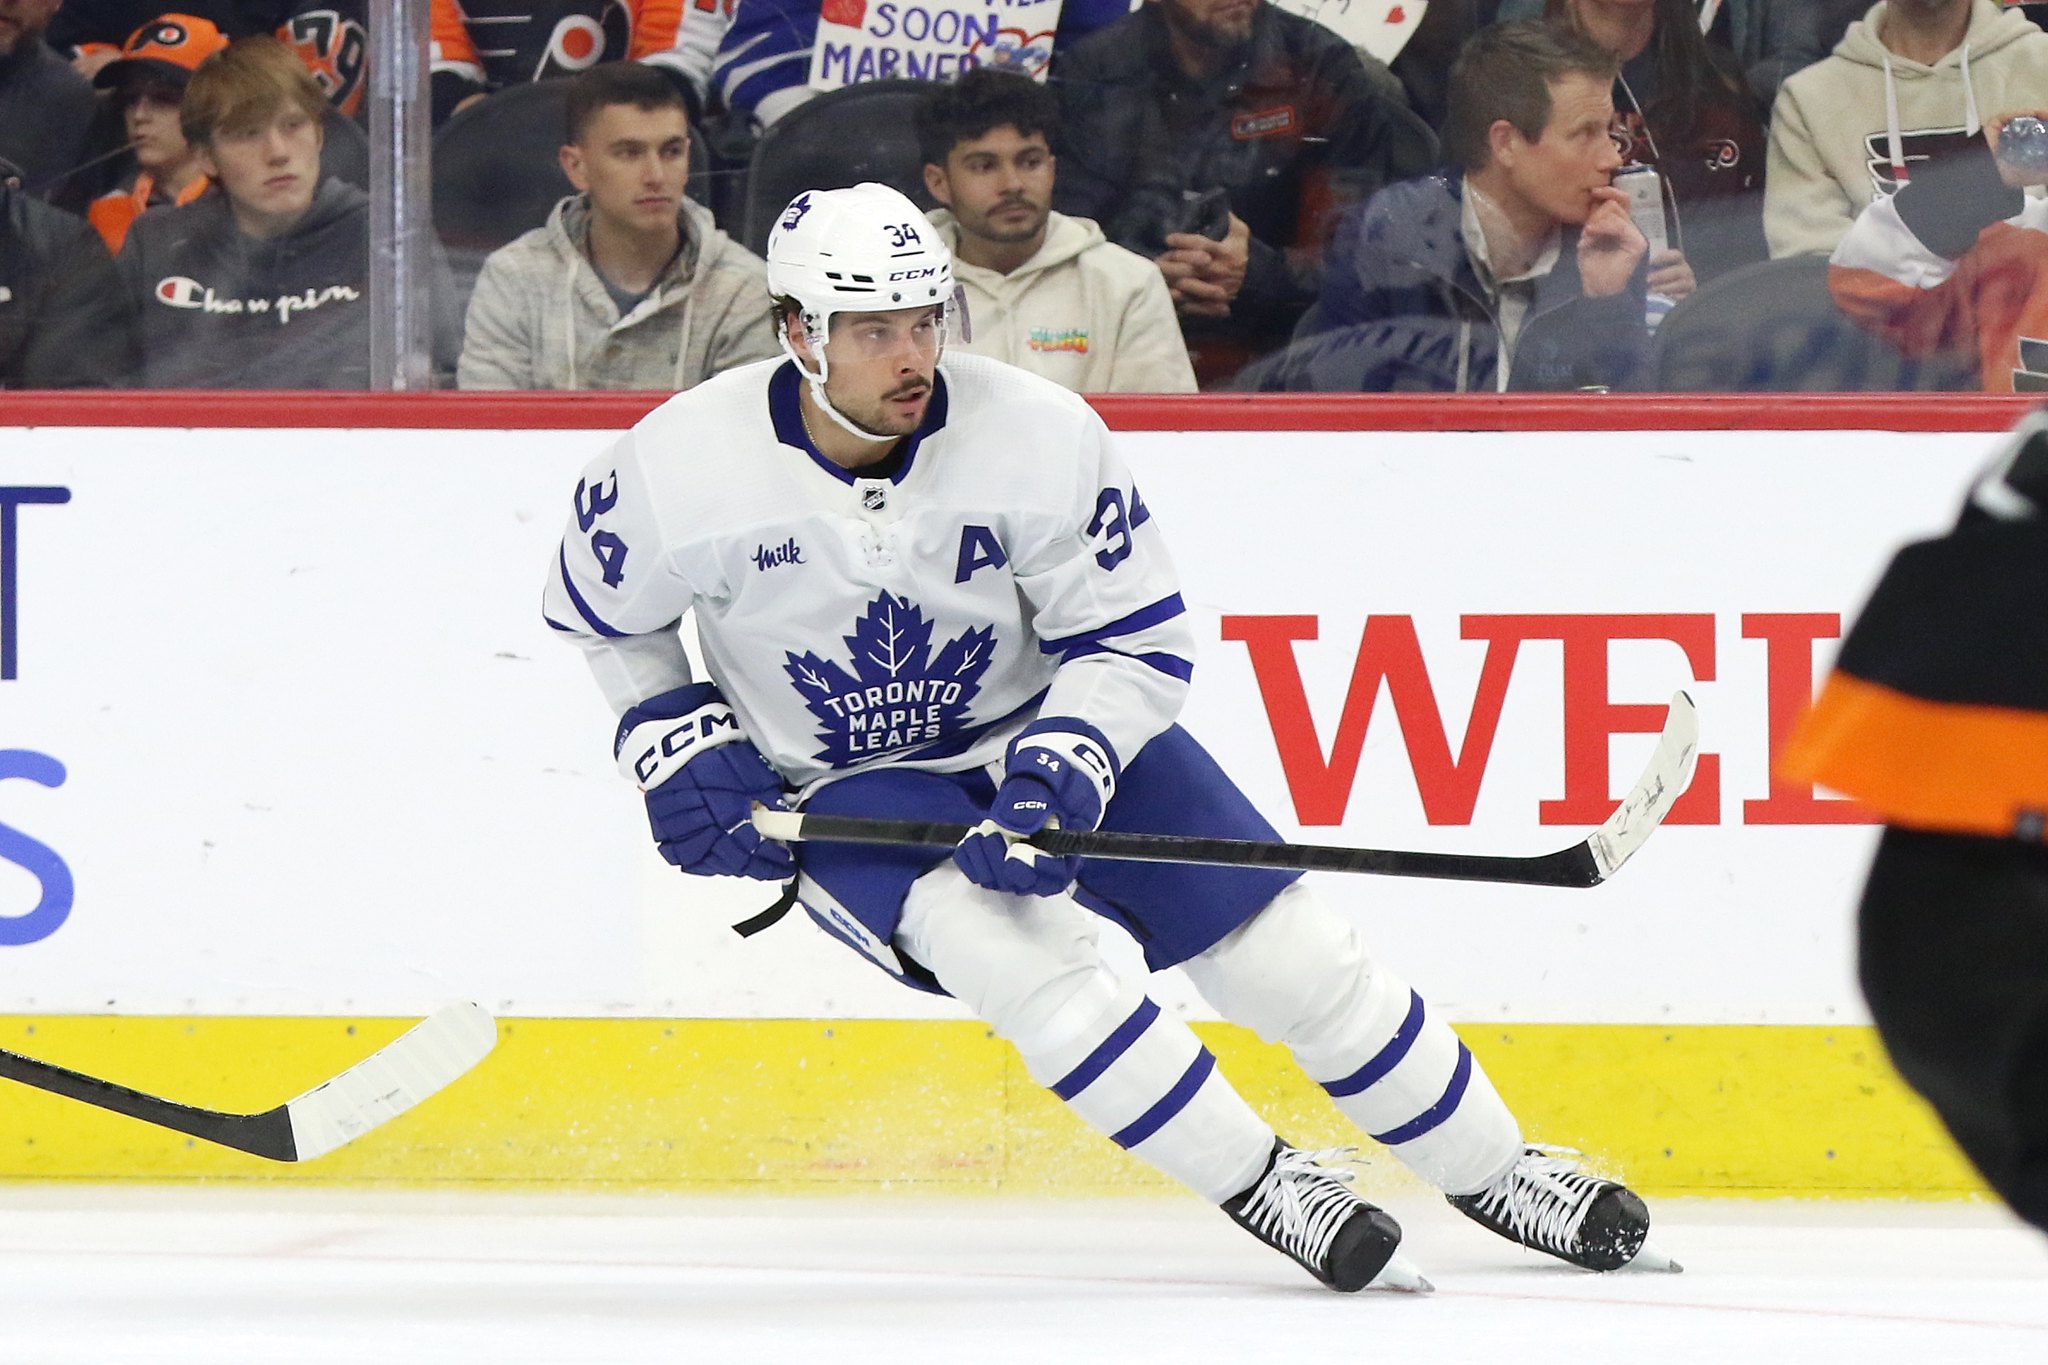 Analyst Says Leafs Have “Passenger” Problem with Matthews in Lineup